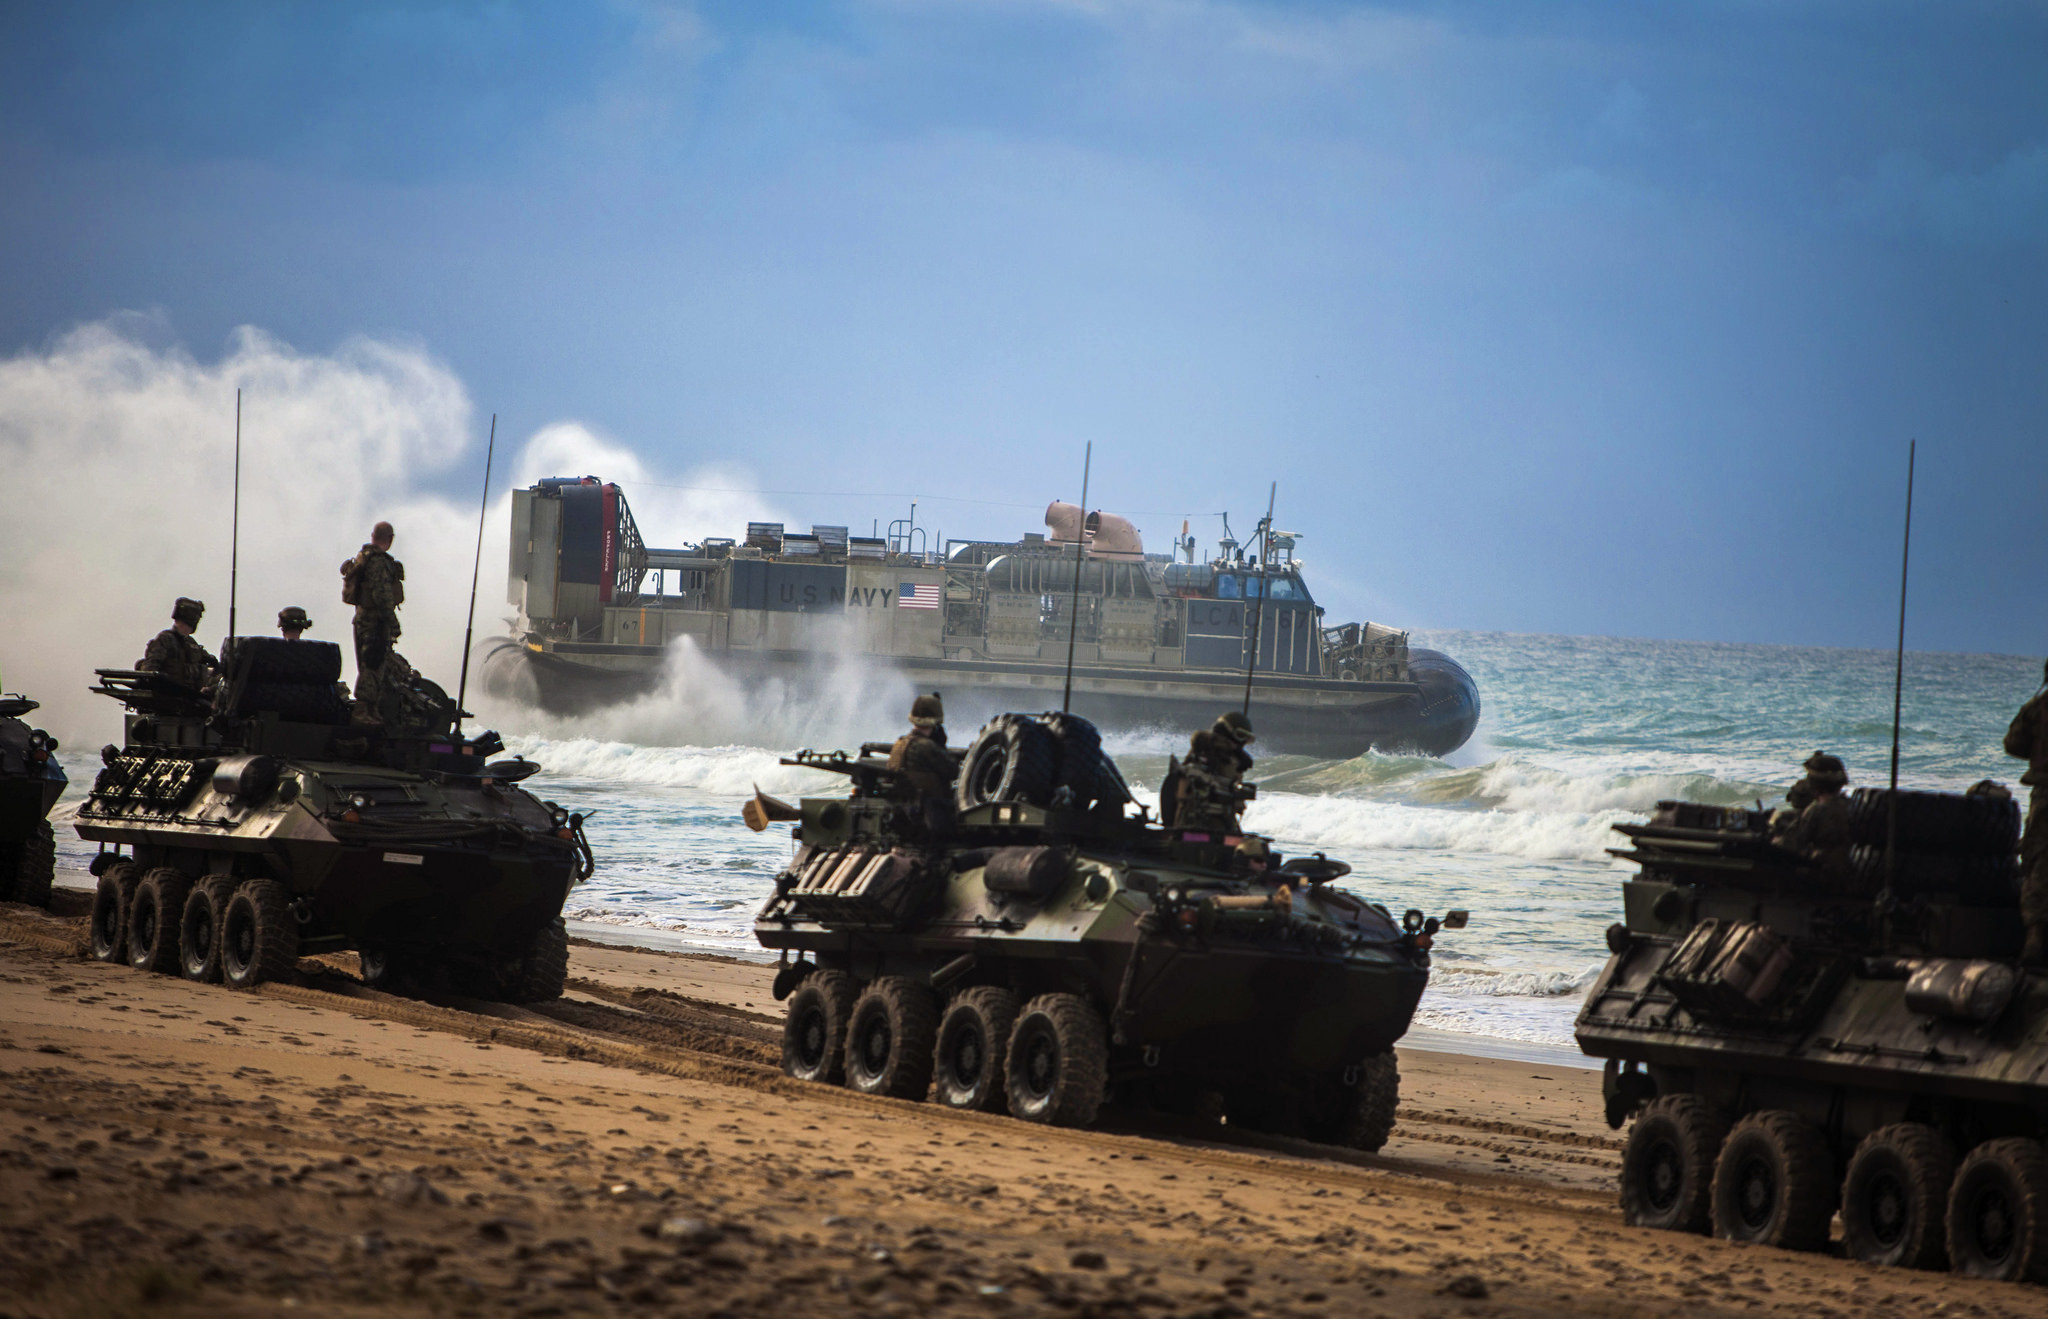 The U.S. Marines Have a Big Problem with Their New Amphibious Combat